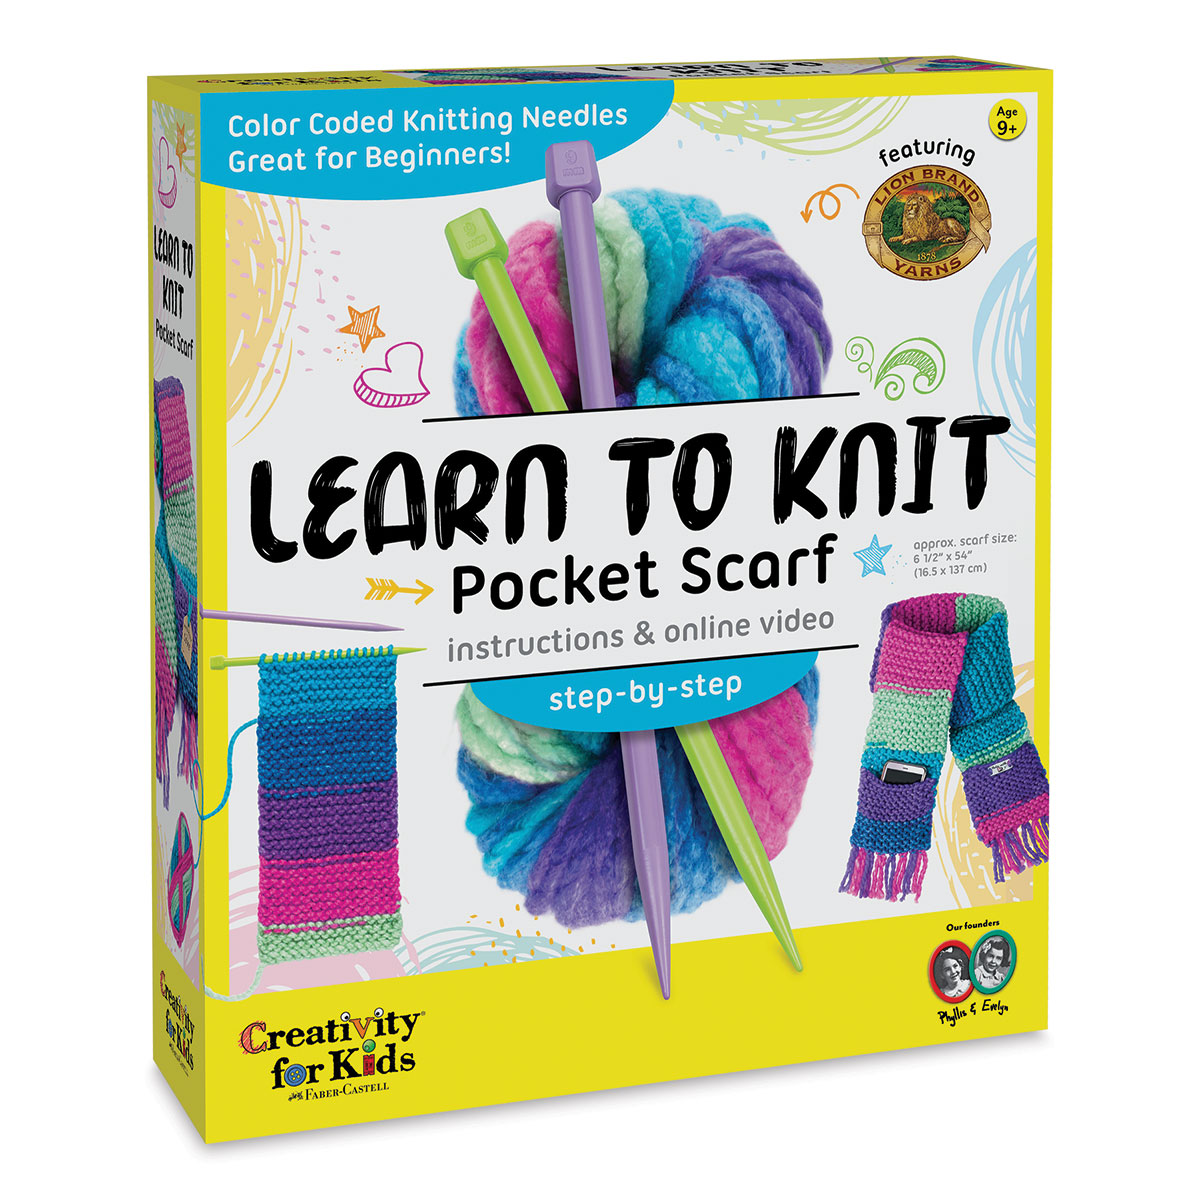 SpiceBox Beginners Knitting Kit for Kids, DIY Arts and Crafts, Learn